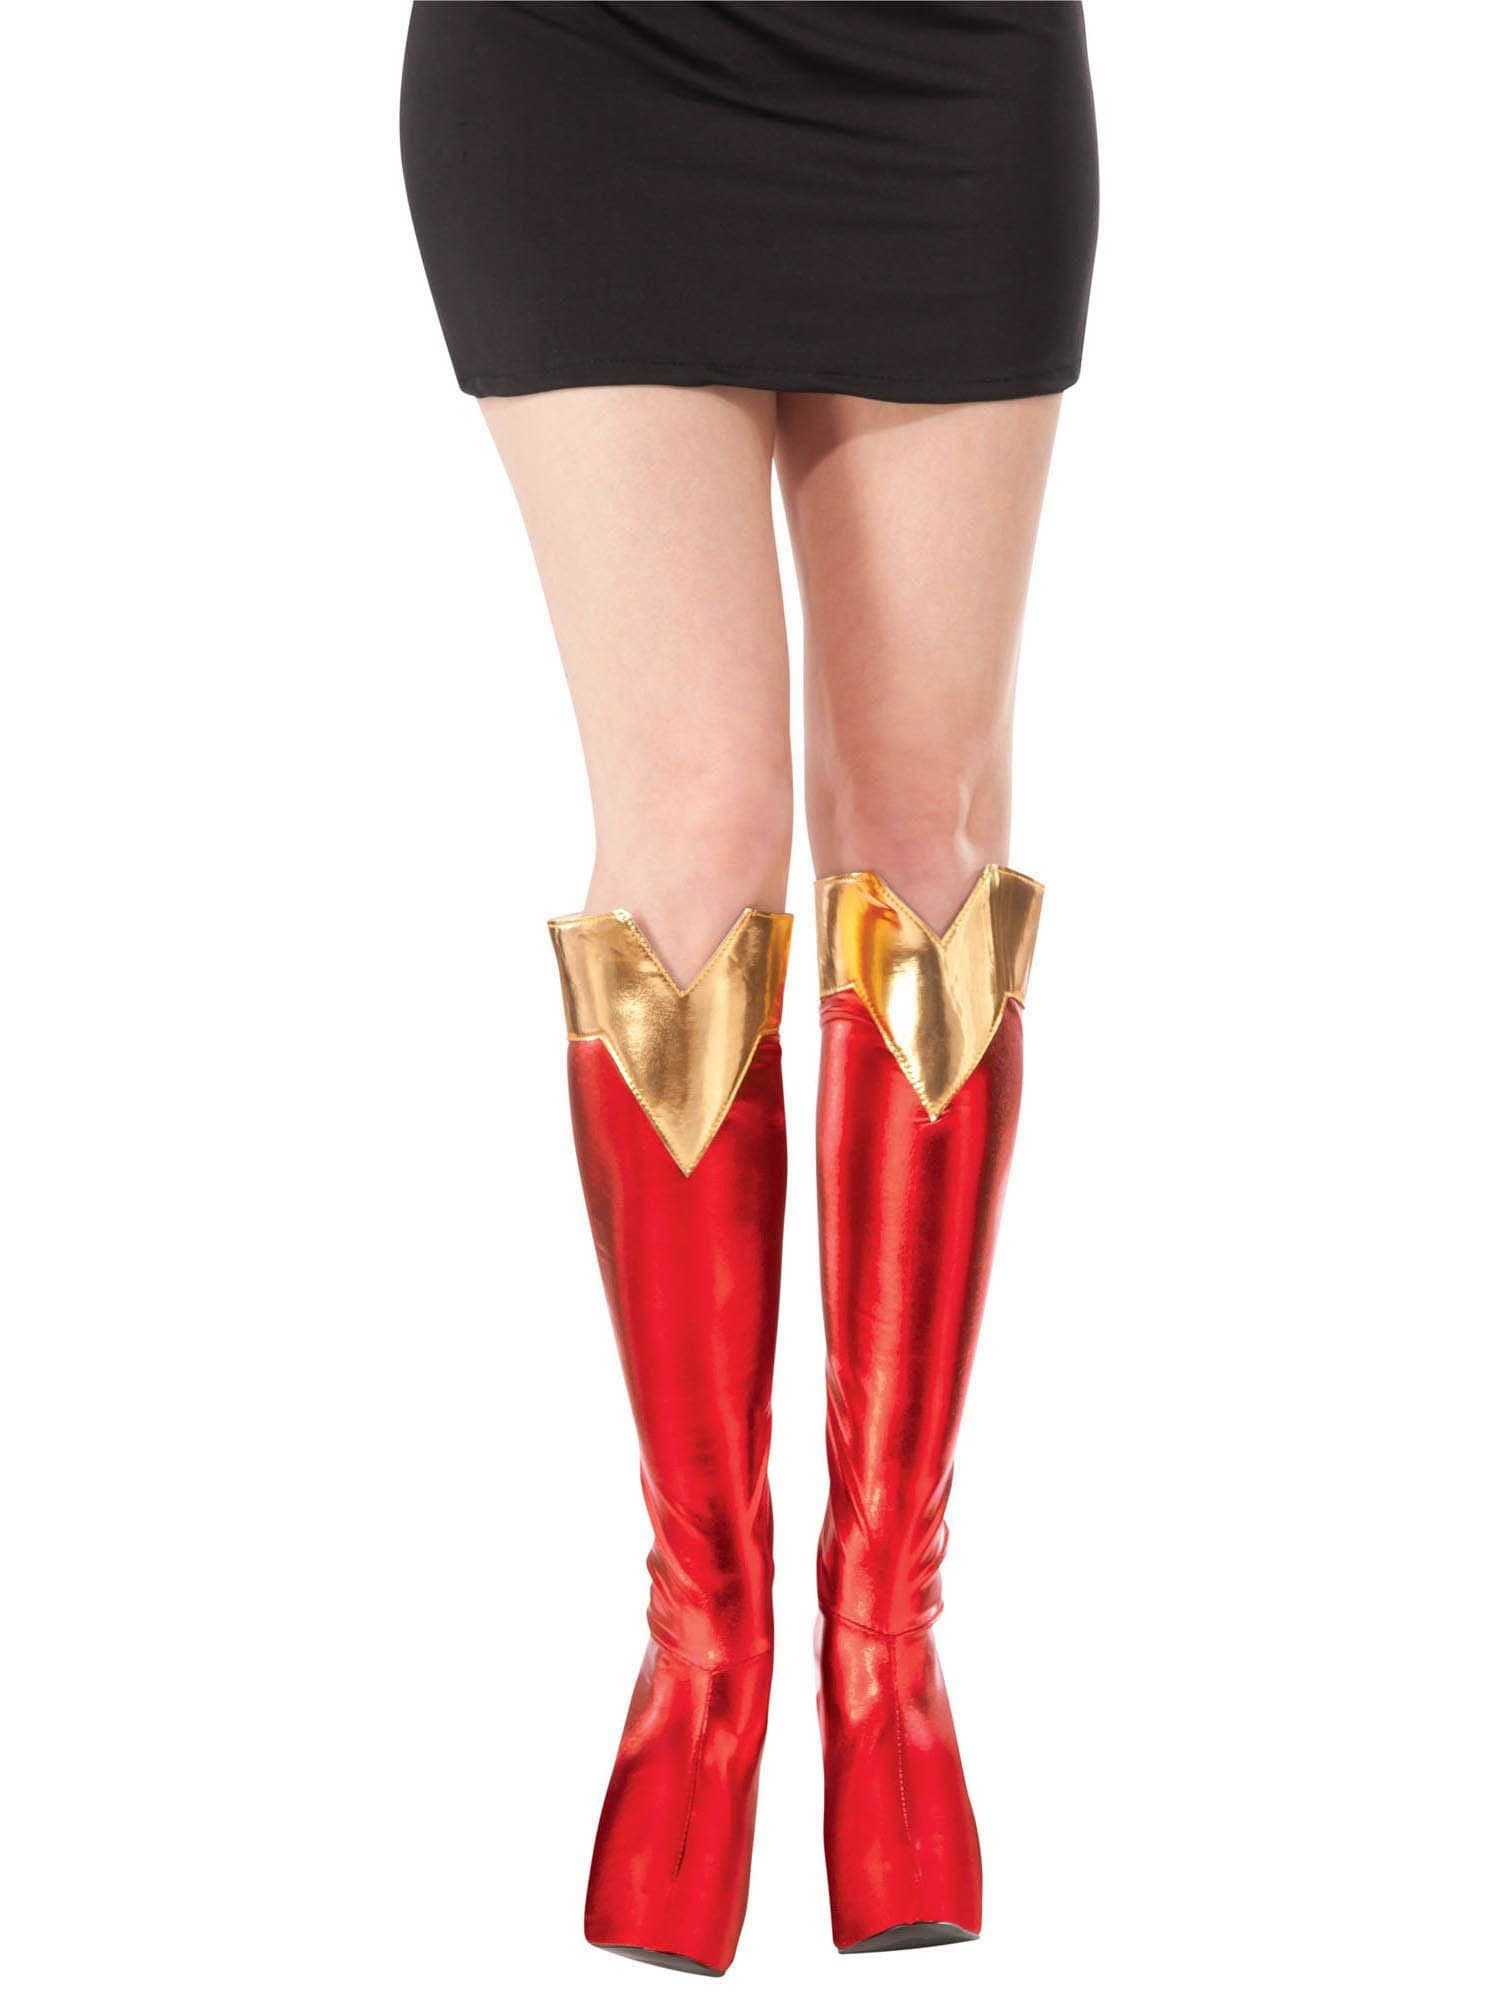 Adult Red Supergirl Boot Tops - costumes.com